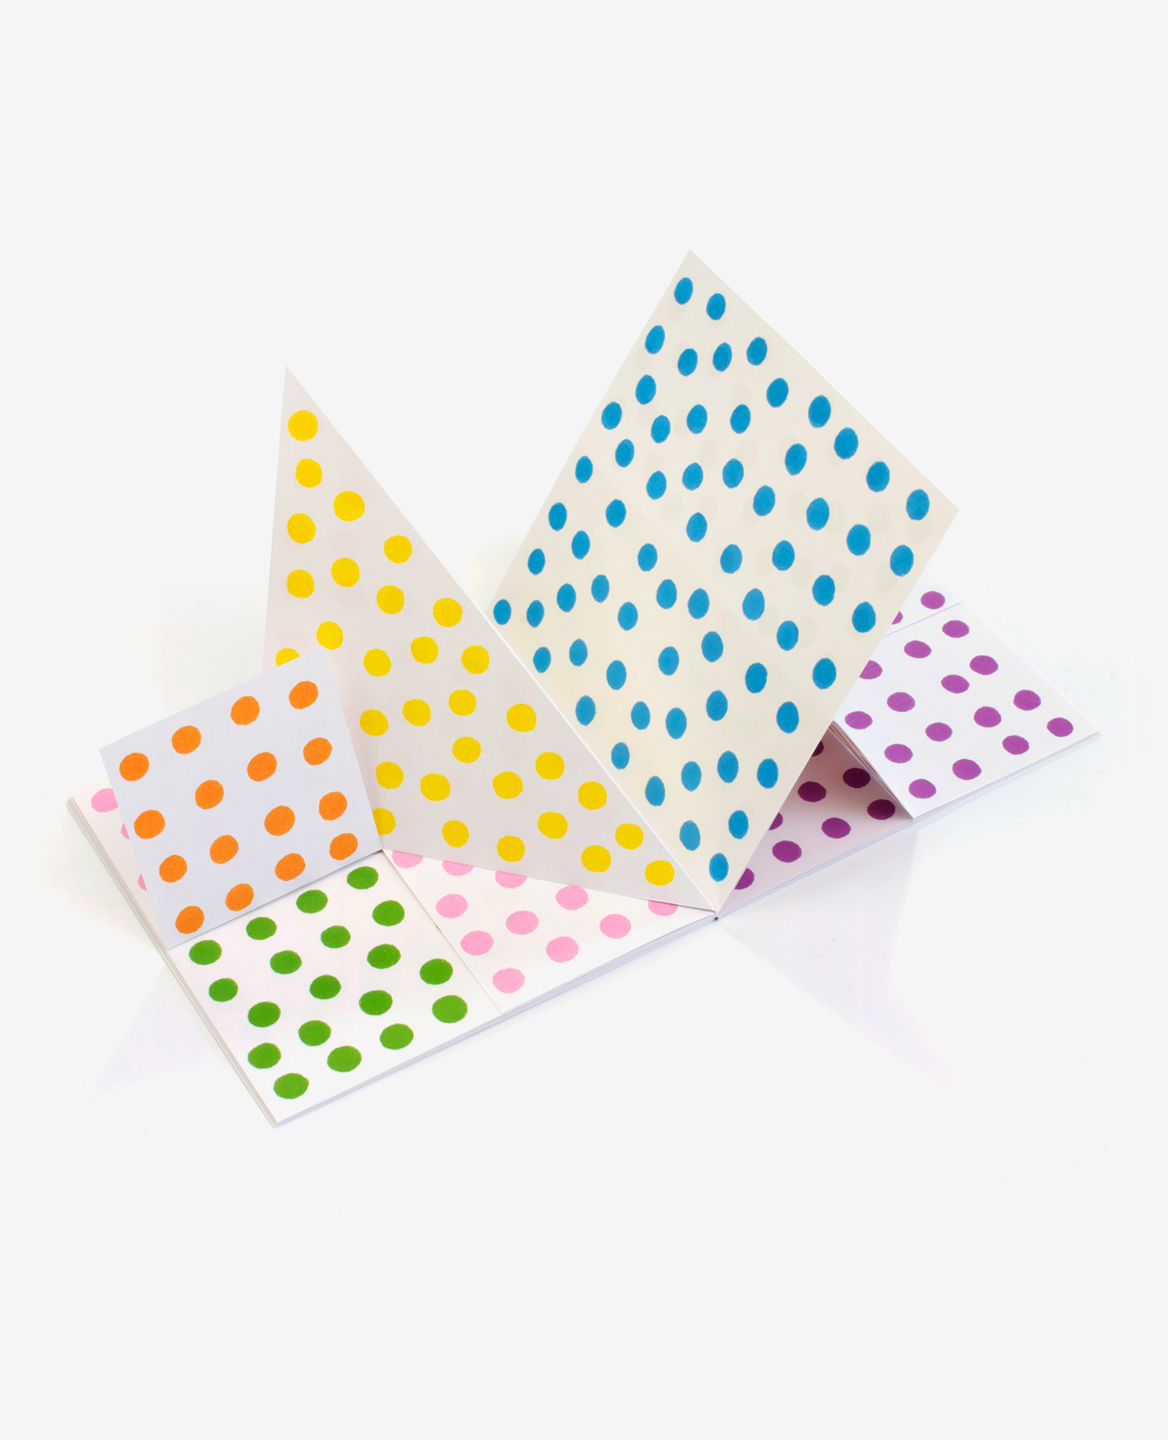 3D view of the book Dots by Antonio Ladrillo published by Éditions du livre